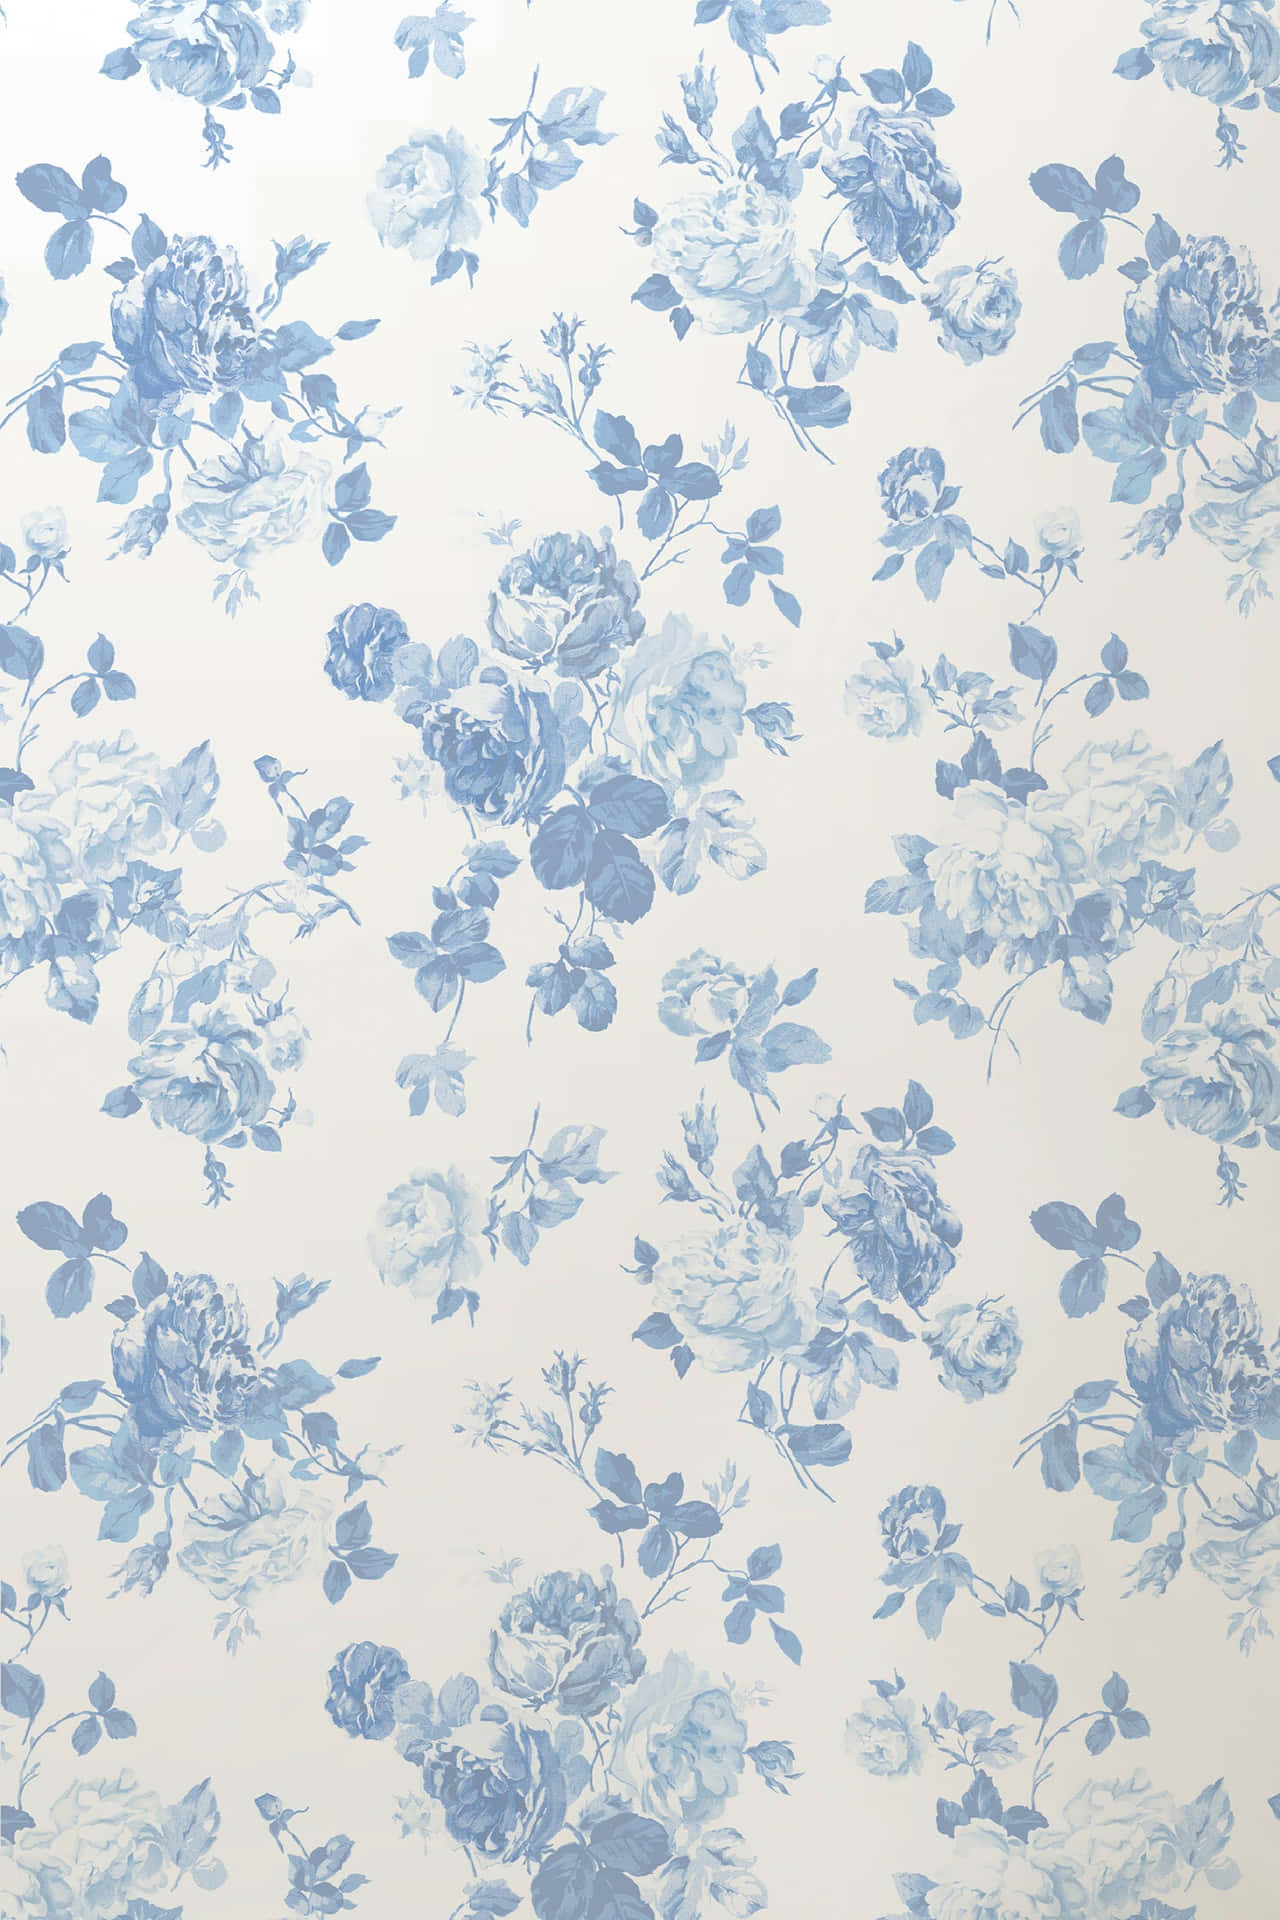 Fancy Blue Flowers White Phone Background